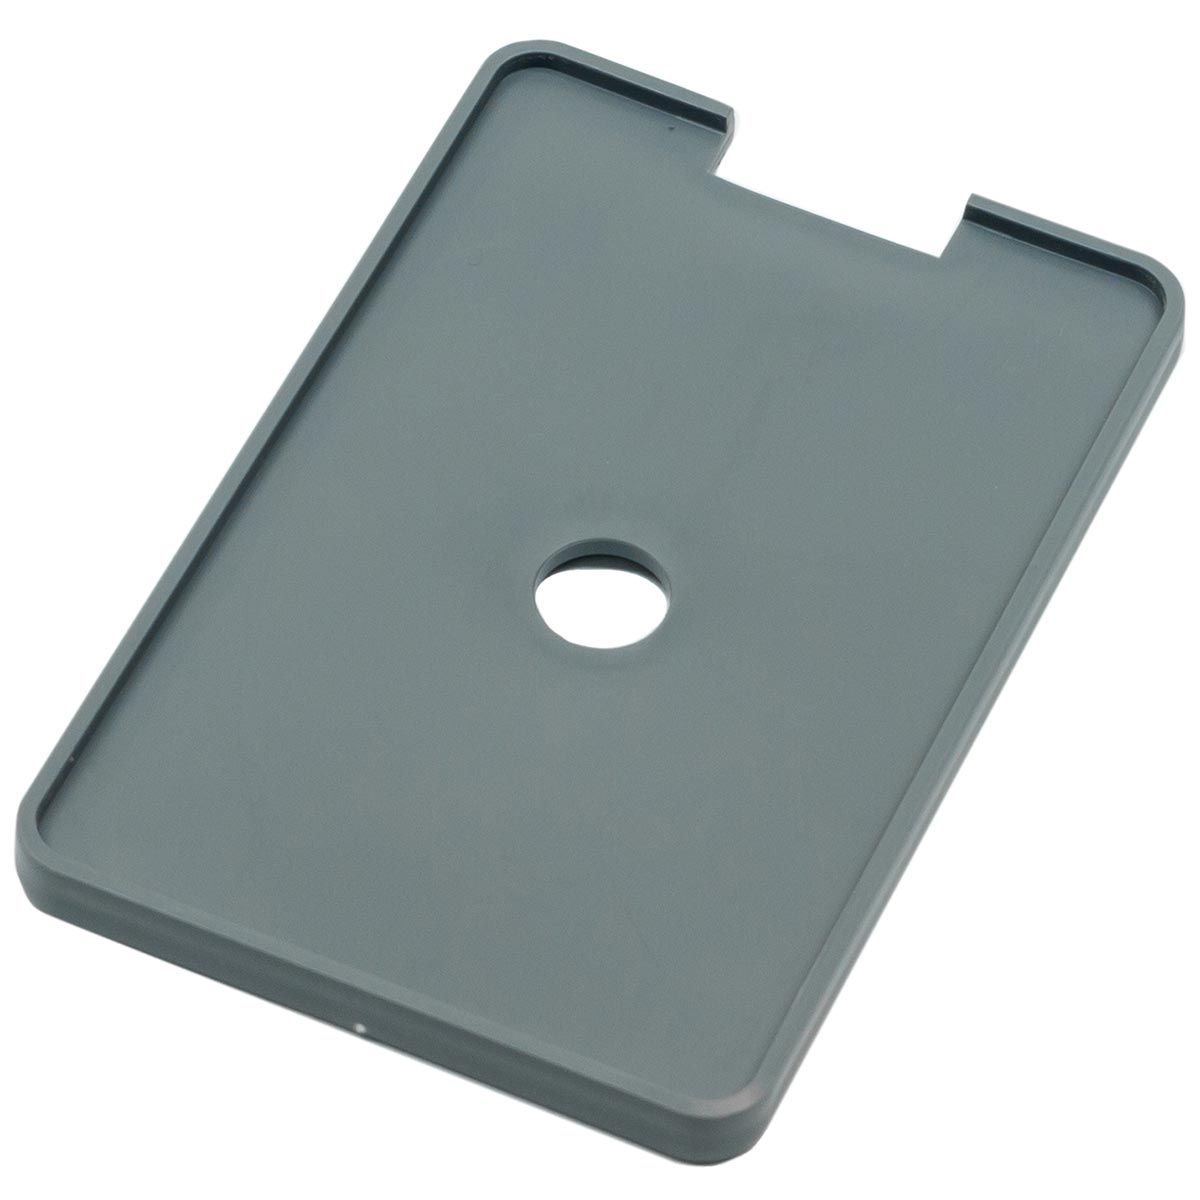 Replacement Pad Storage Tray for the PRESTAN AED UltraTrainer